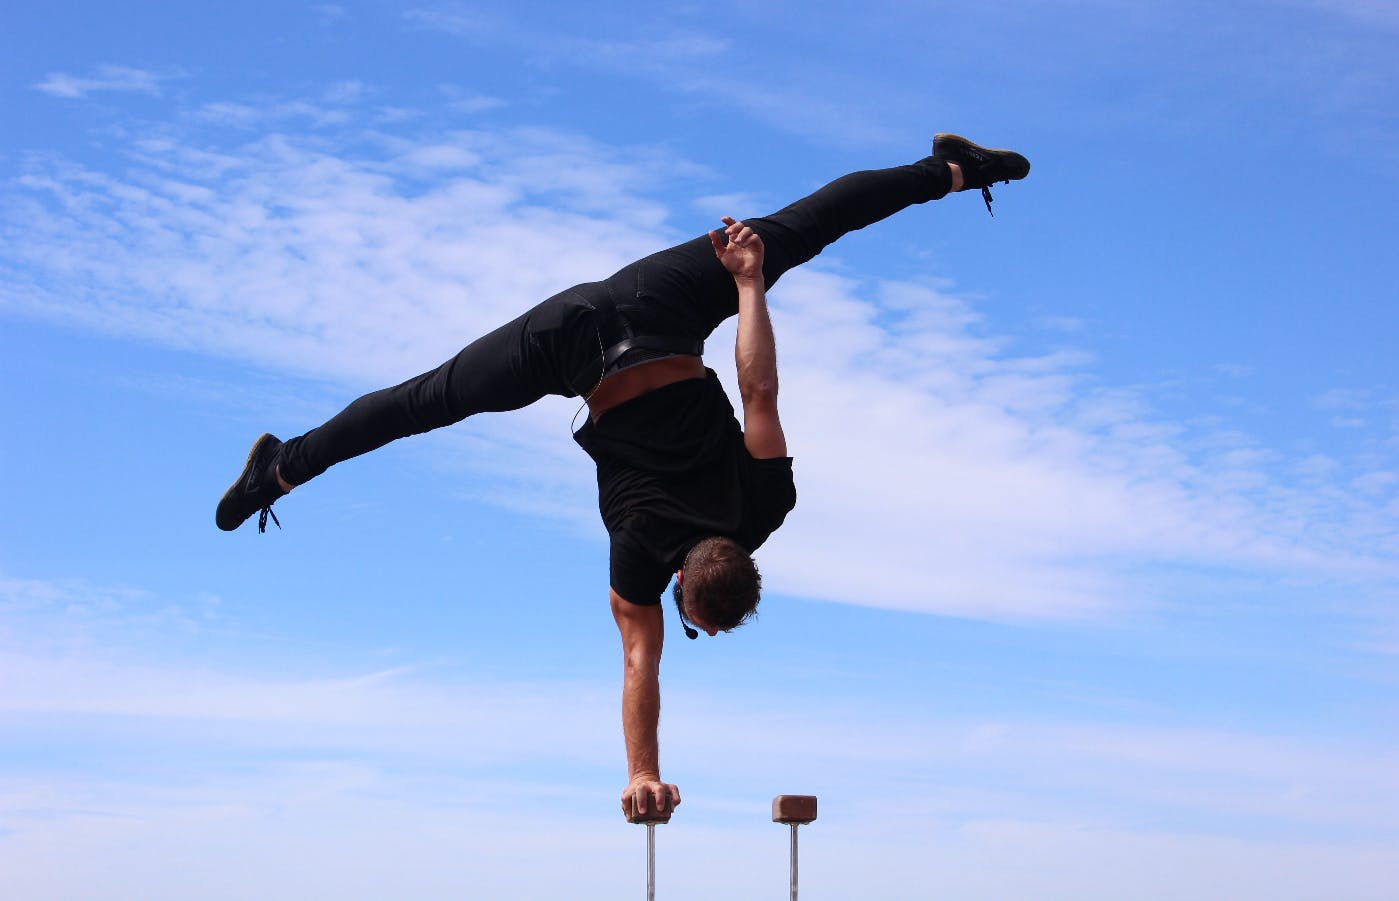 A man doing a one armed handstand on a small block